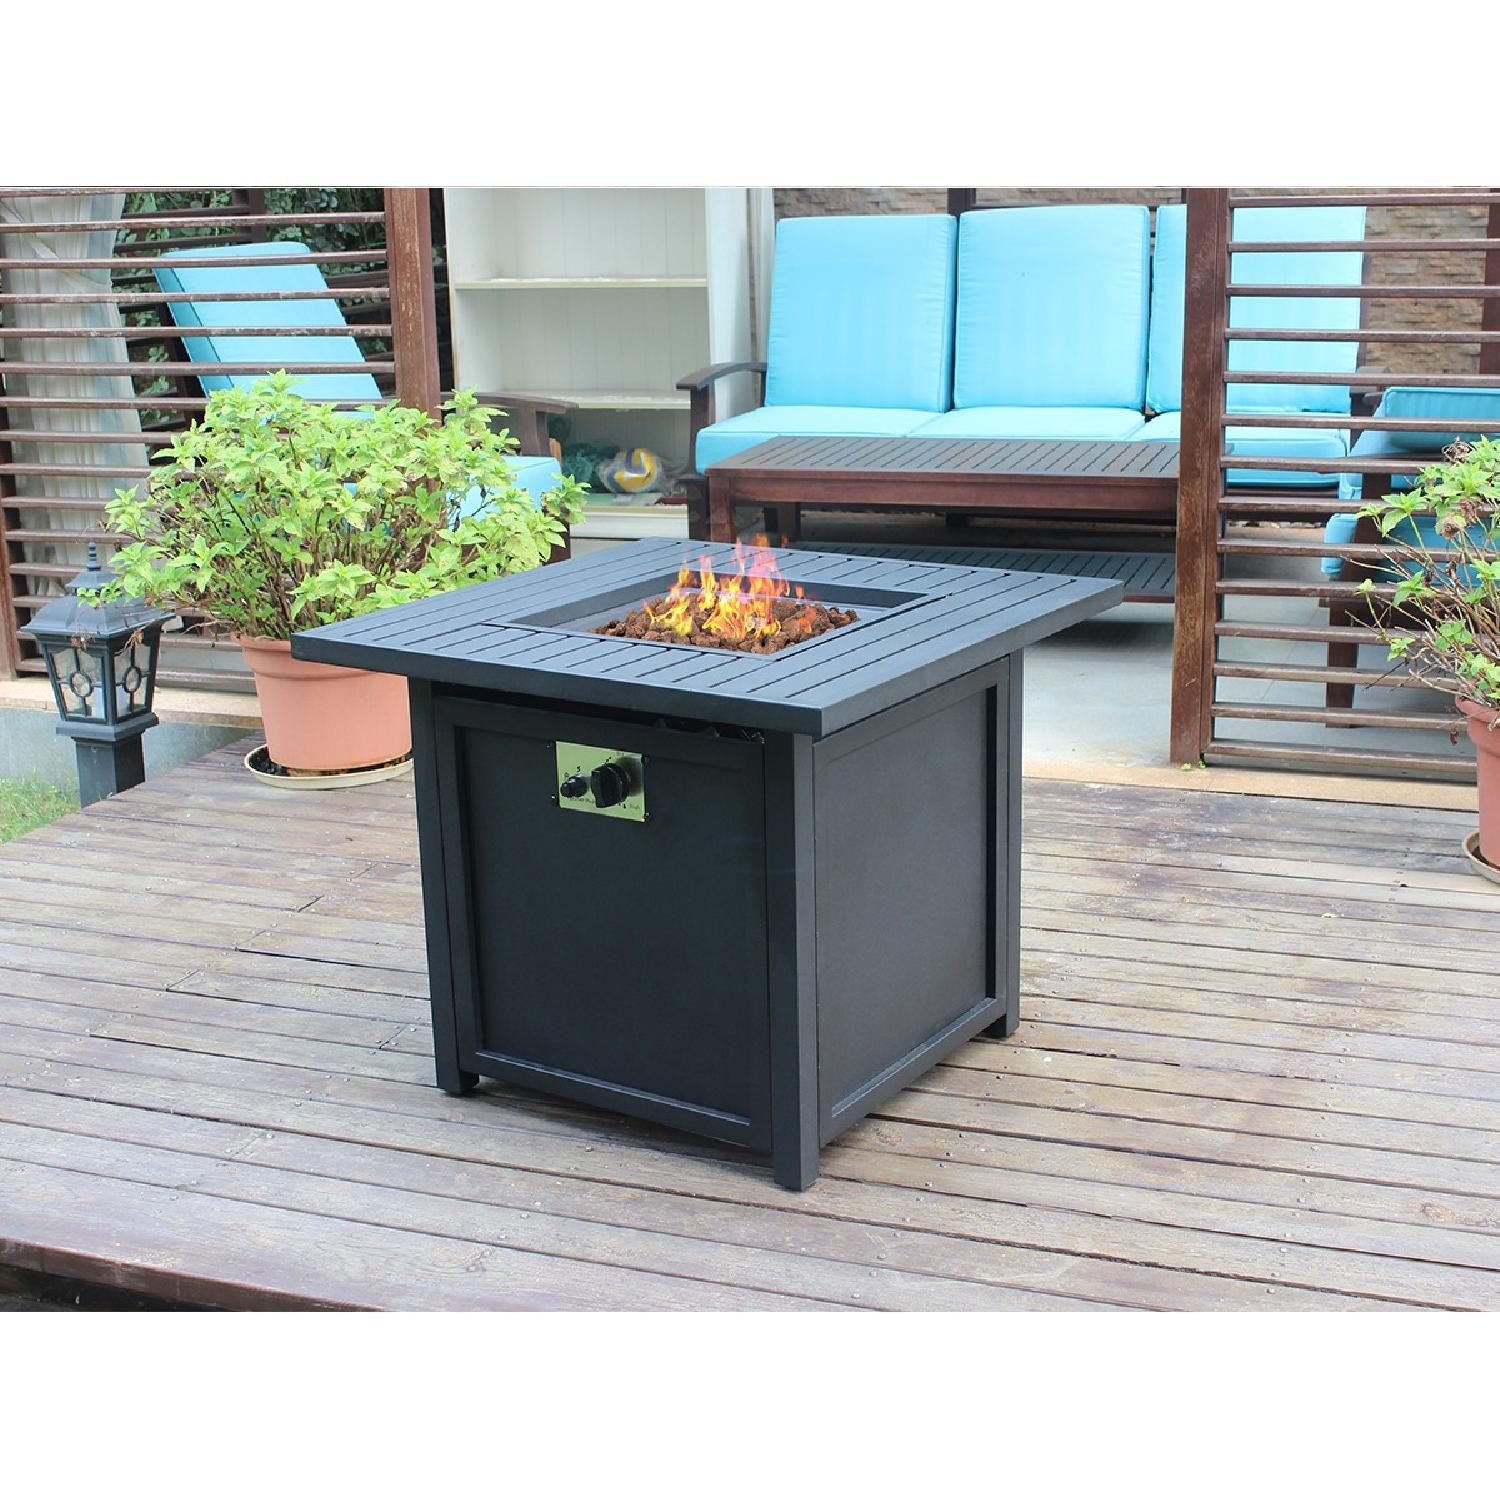 Bali Outdoors Square Durable Brown Gas Fire Pit Cover 30 Inch Wide 24 High for sale online